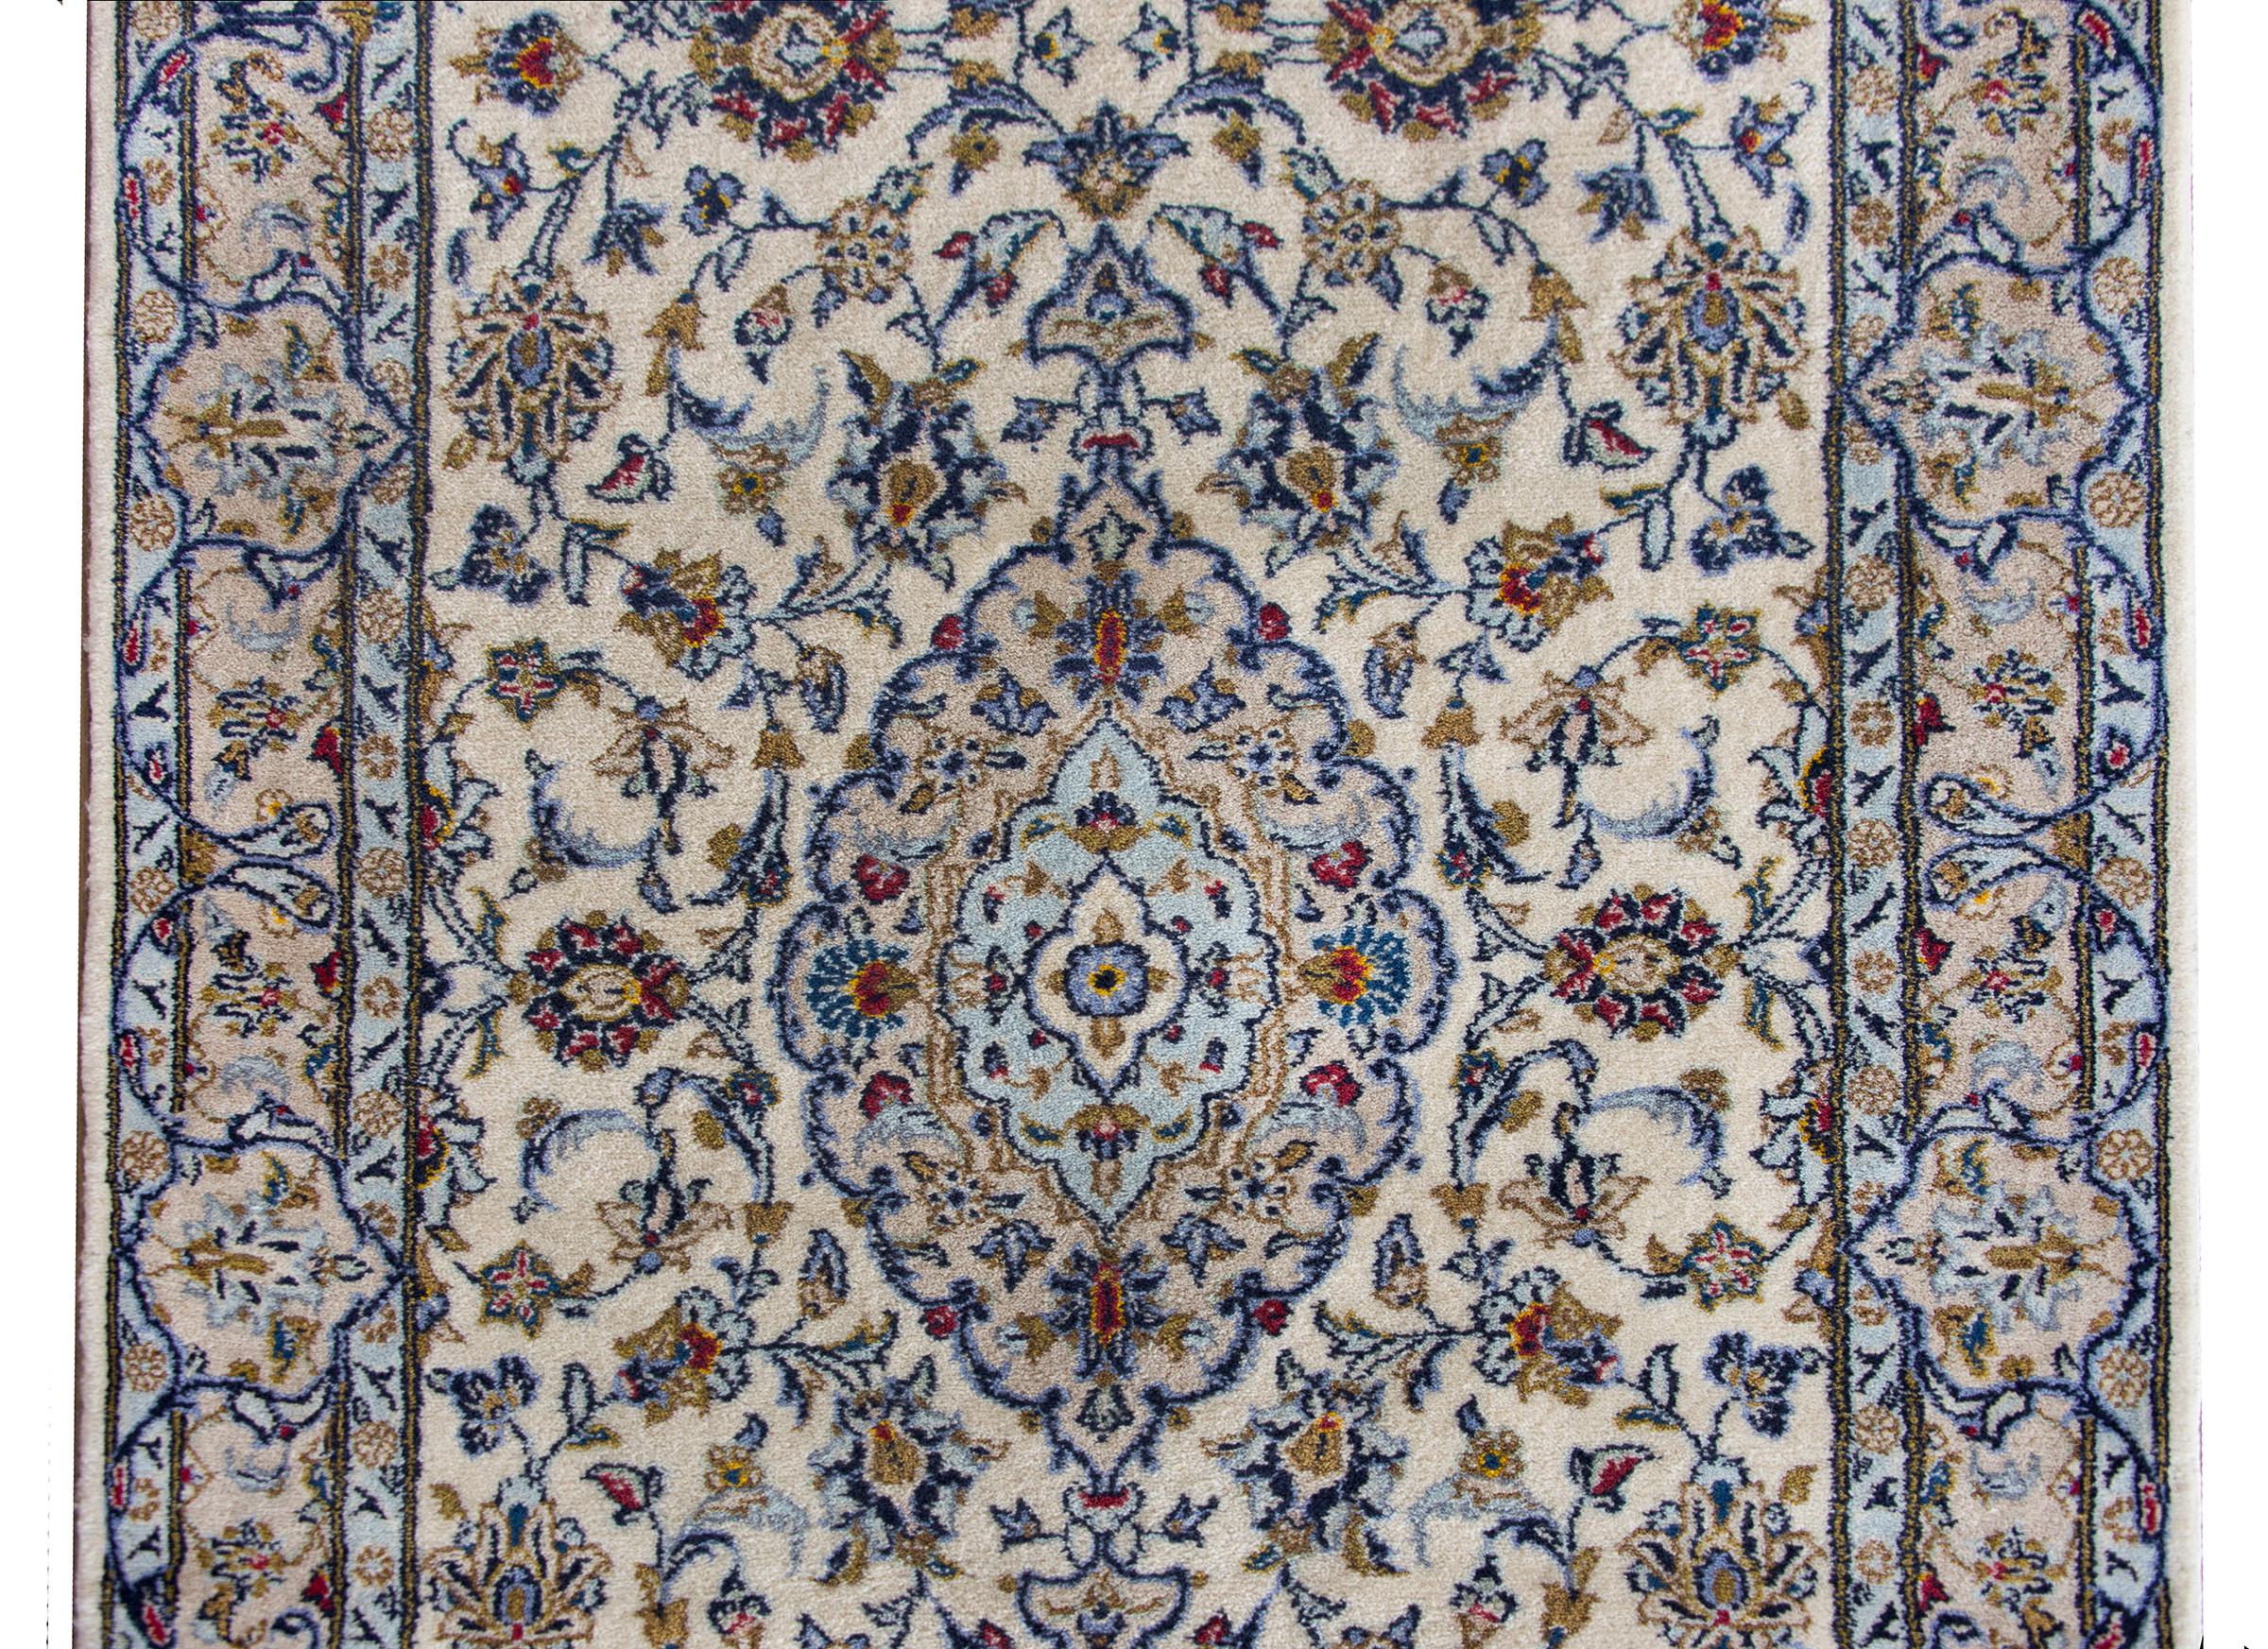 A beautiful mid-20th century Persian Kashan runner with a four large floral medallions living amidst a field of even more scrolling vines and flowers, all woven in crimson, gold, light and dark indigo, and set against a white background.  The border